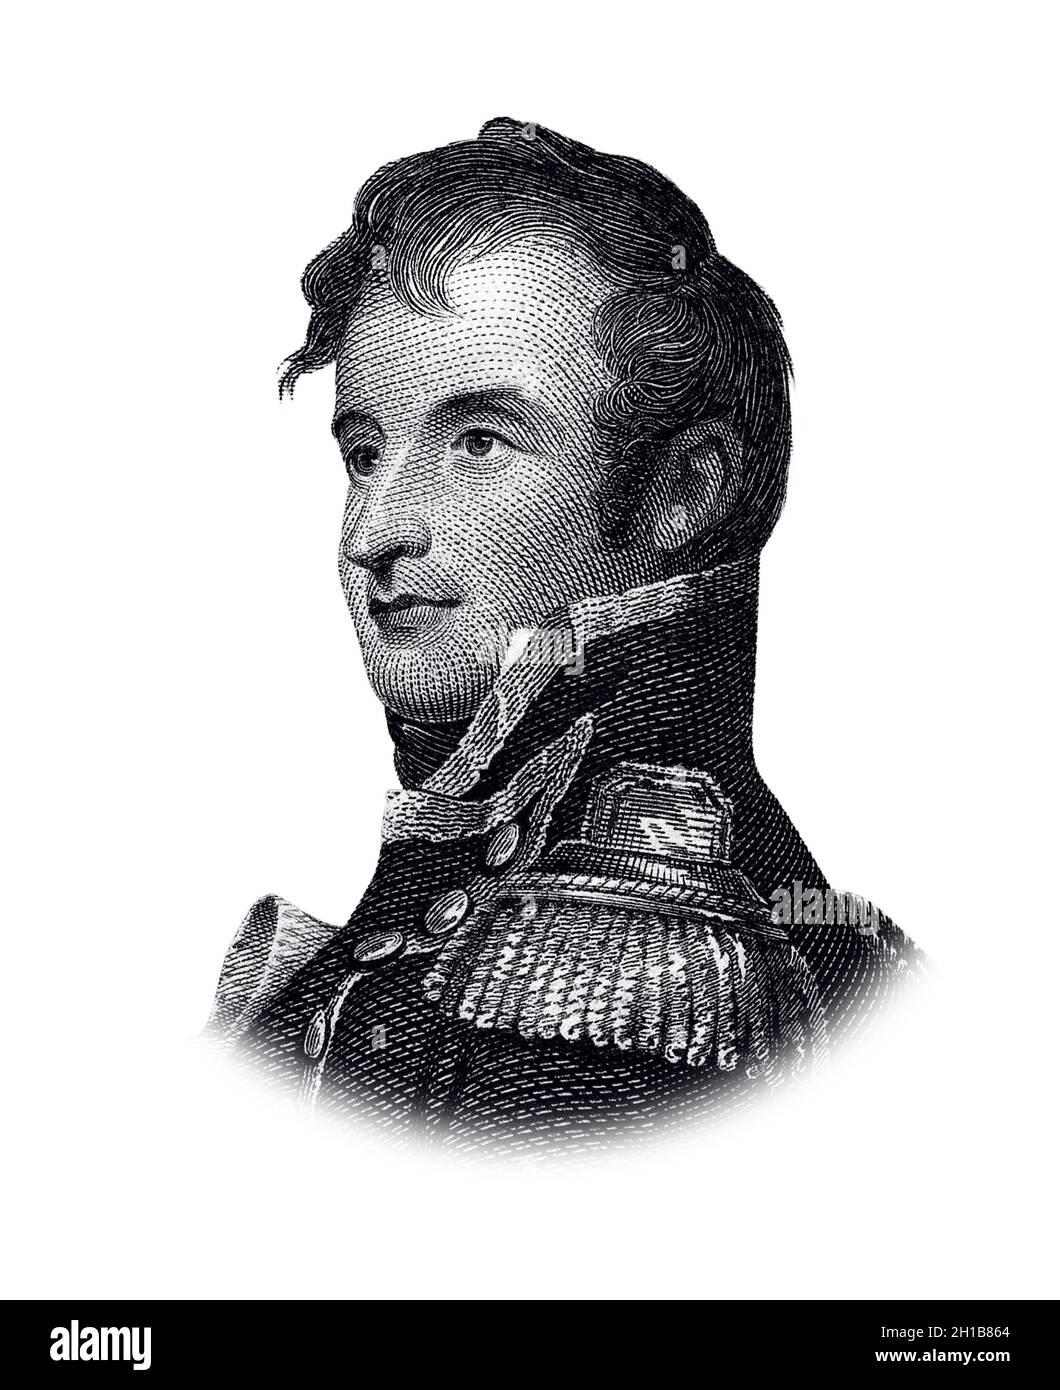 Portrait of Stephen Decatur Isolated on White Background Stock Photo